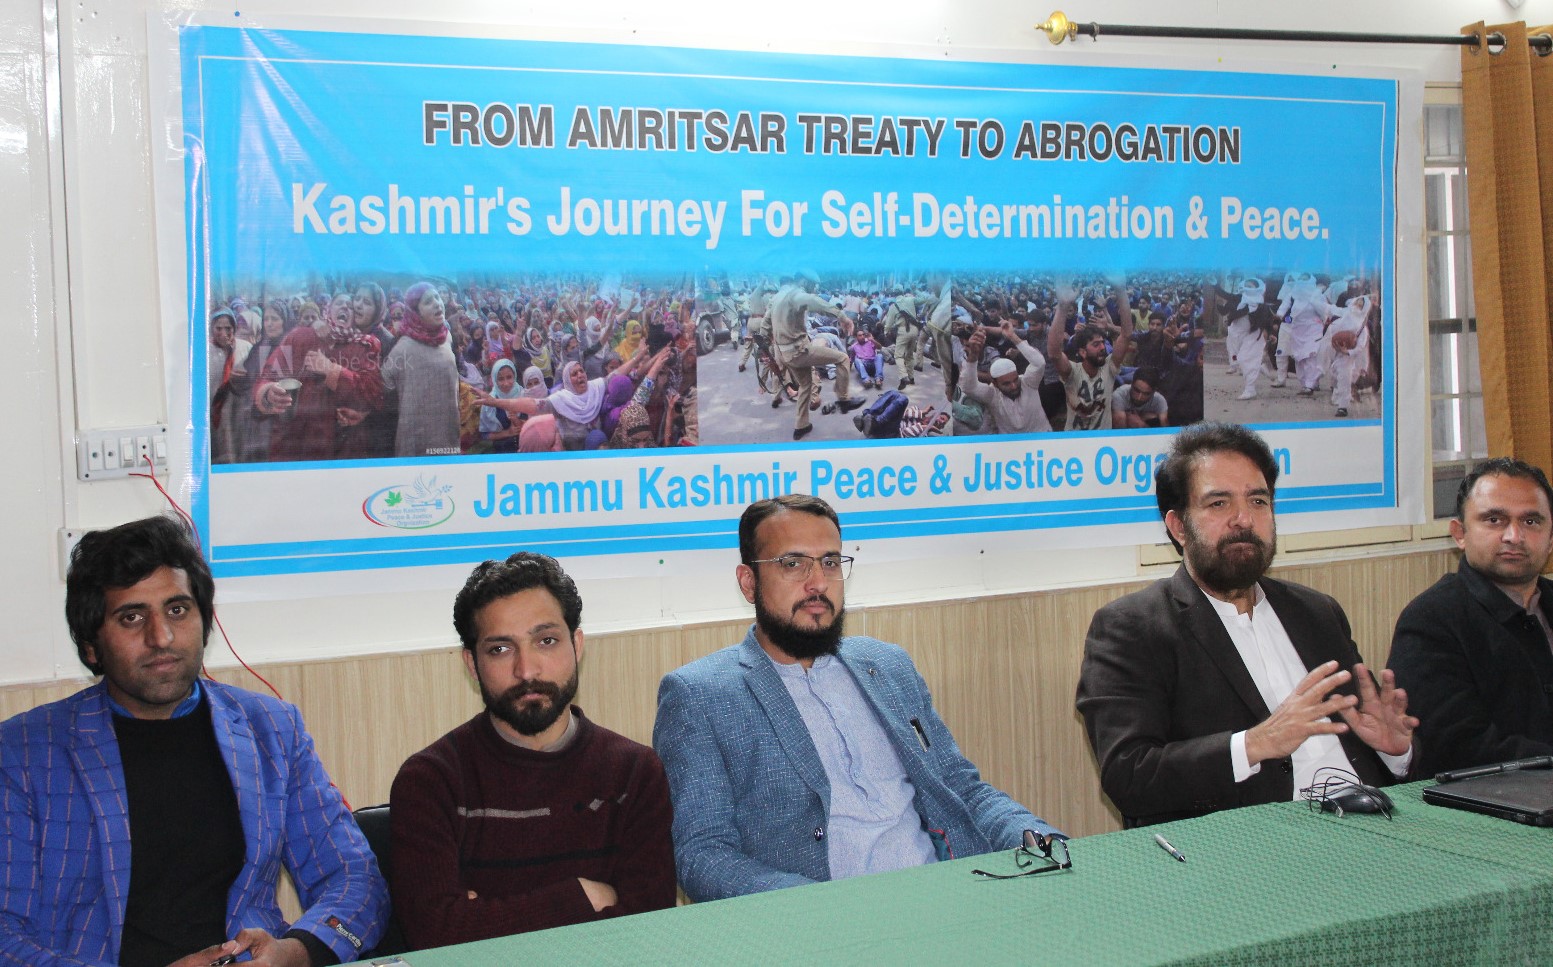 Speakers call for global intervention over Kashmir to ensure peace